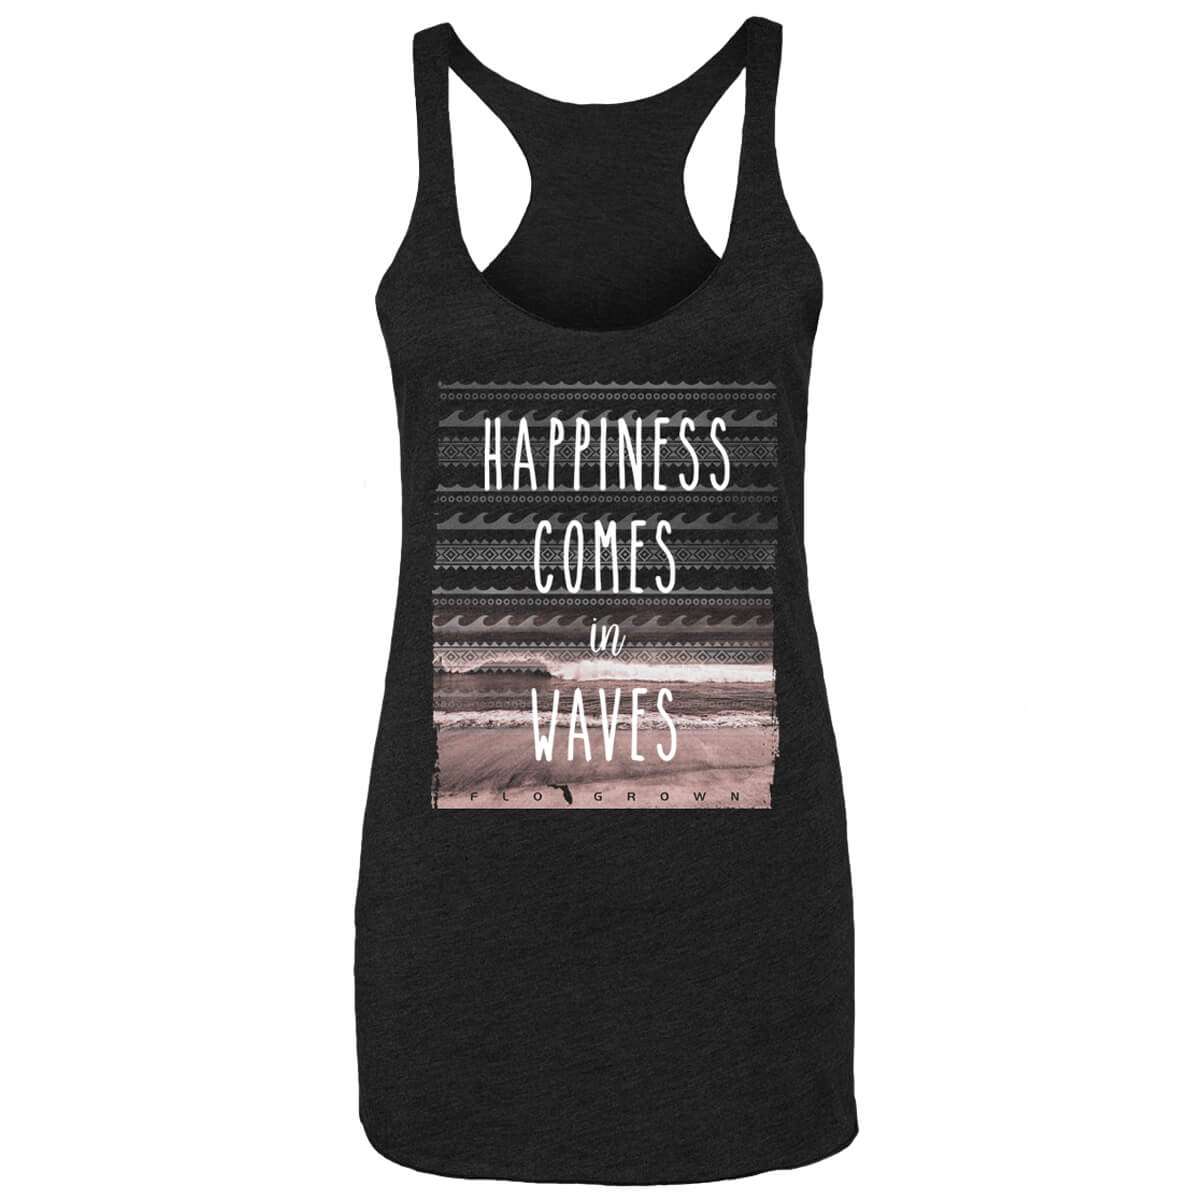 Happiness comes in waves tank